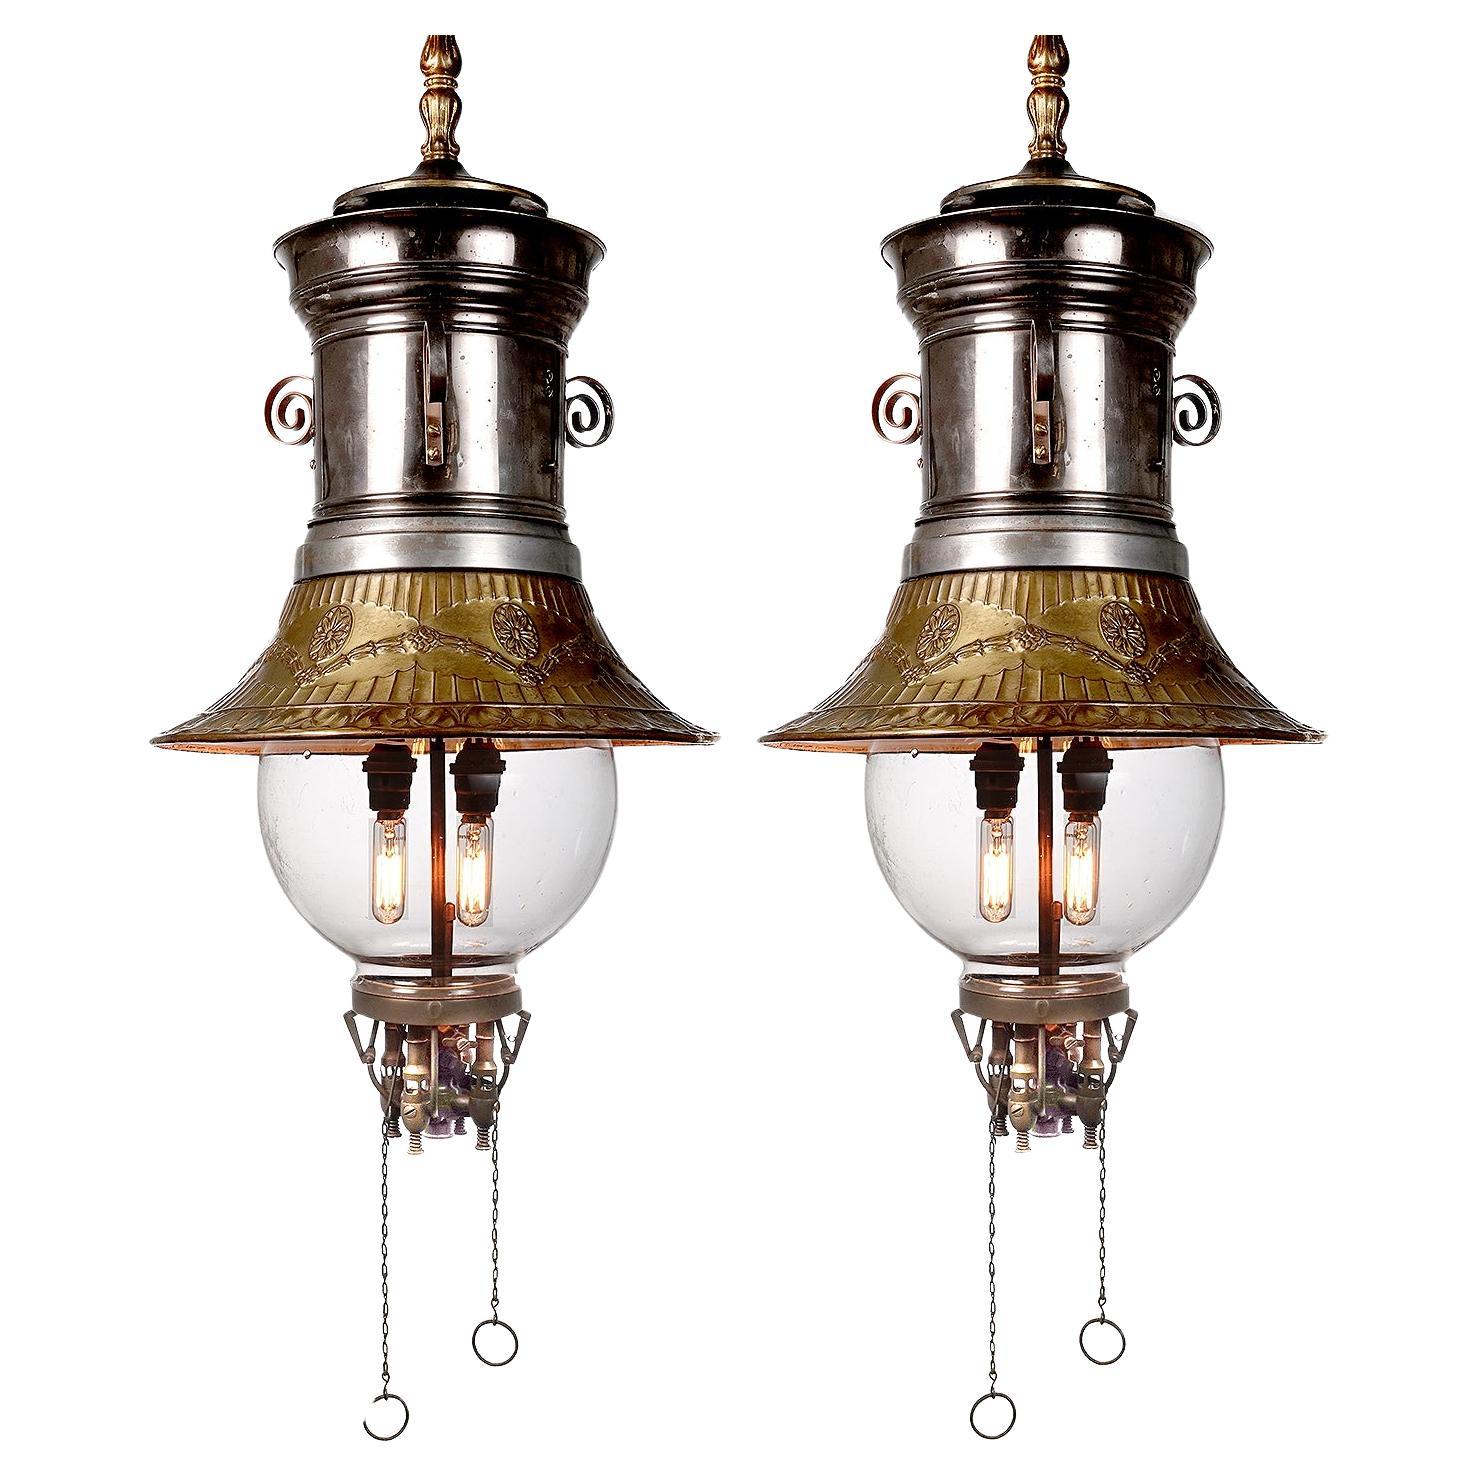 The Most Amazing Pair of Early Humphrey Gas Lamps